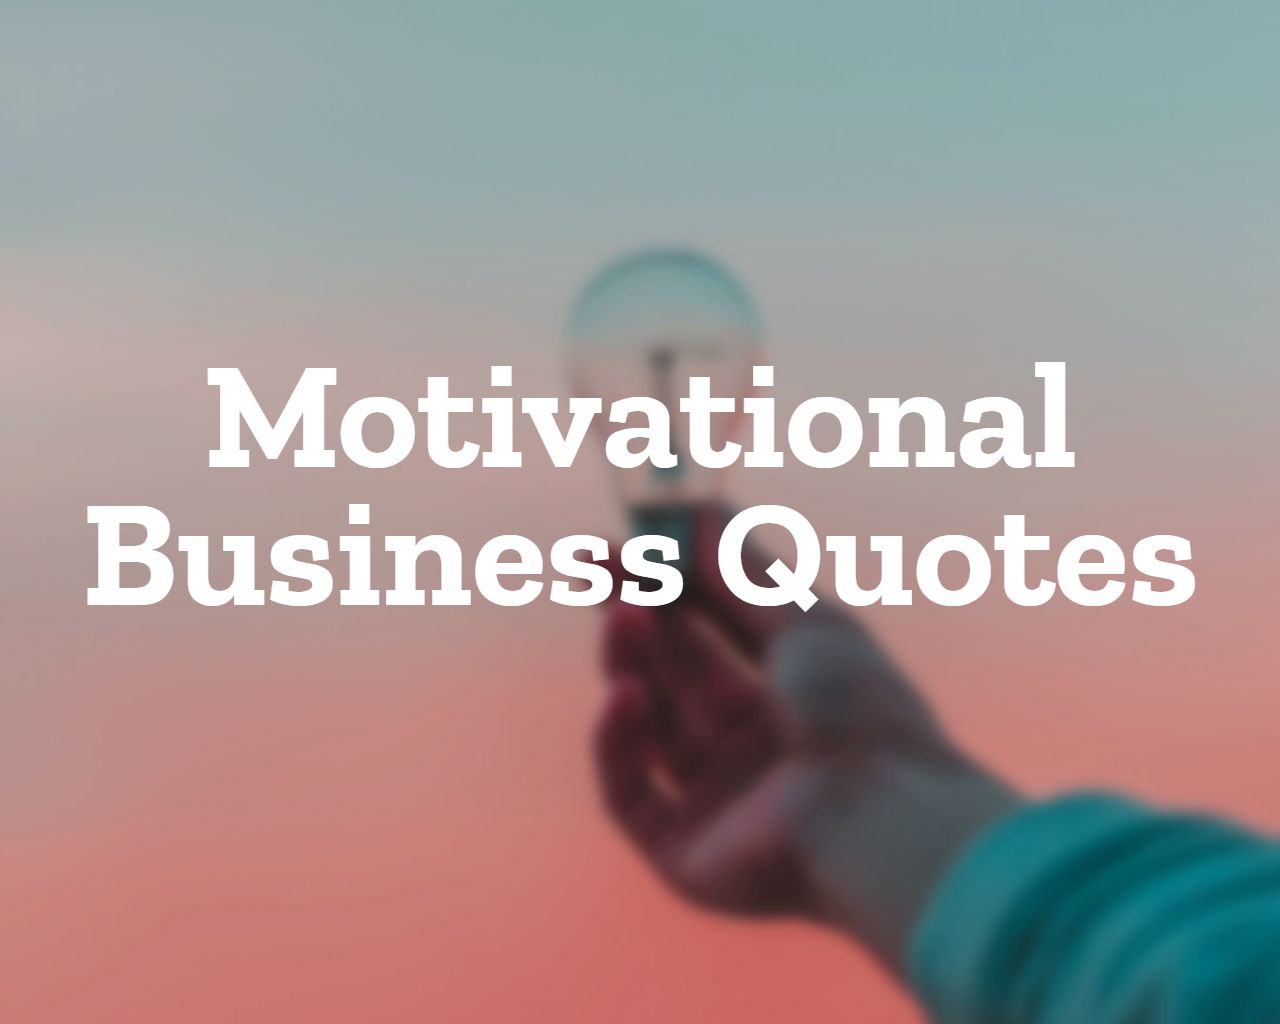 motivational business quotes | The Inspiring Journal